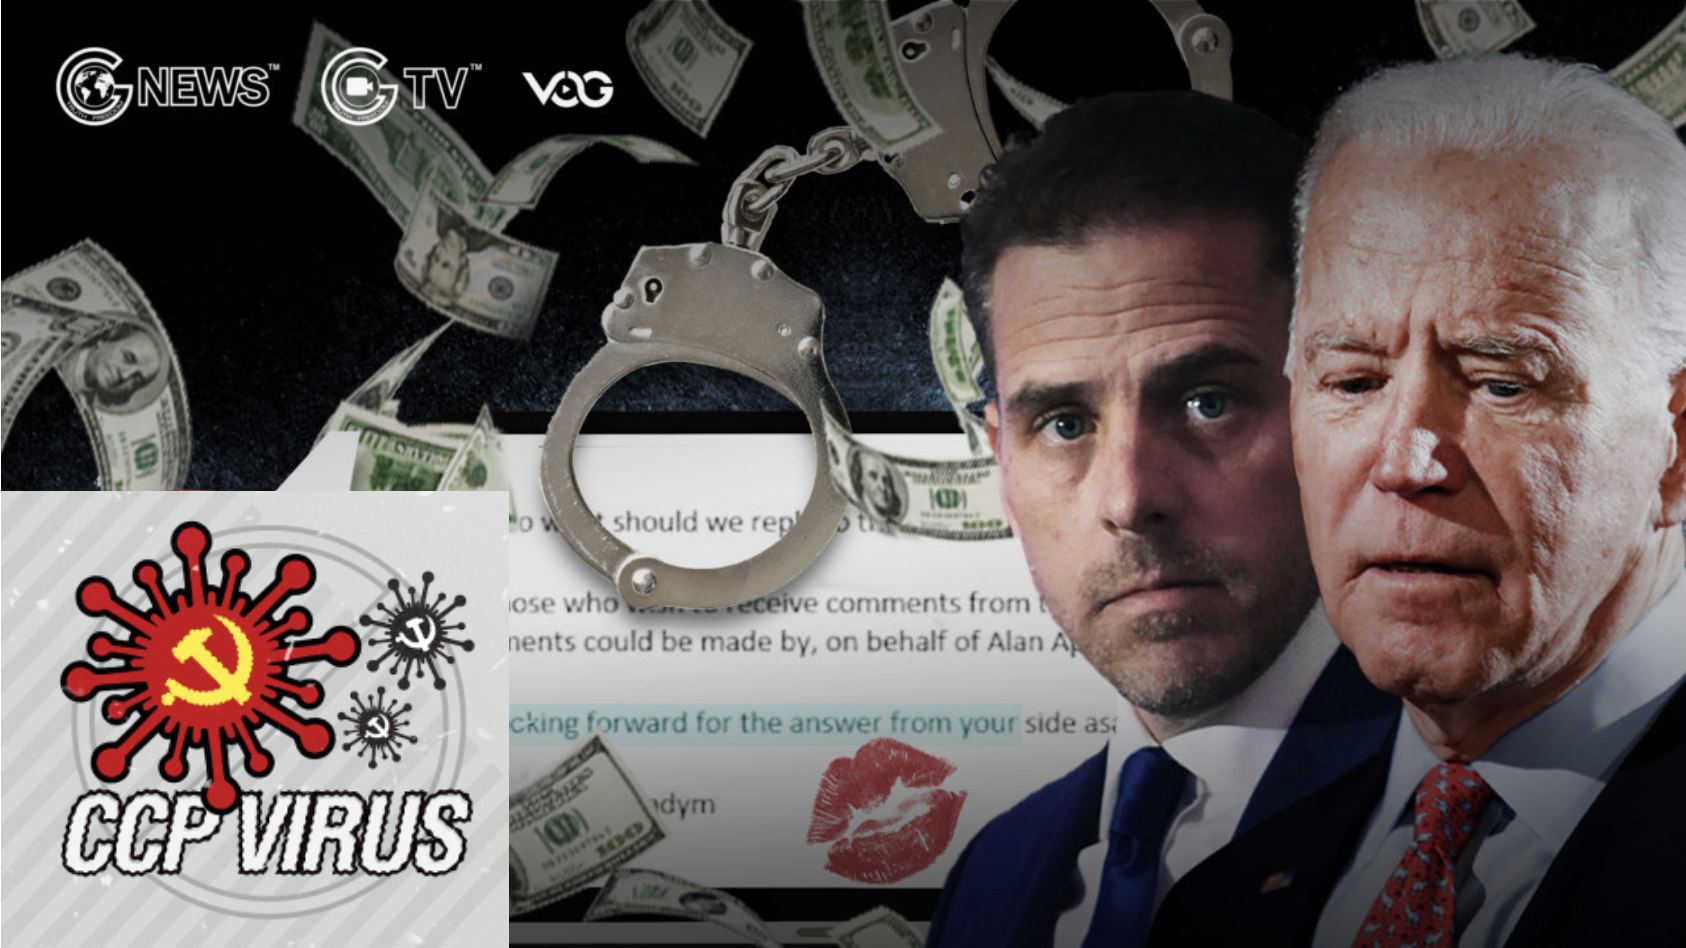 Hunter Biden’s “Hard Drive From Hell”: A List of Some Images, Footages and Documents From The Hard Drive – GNEWS